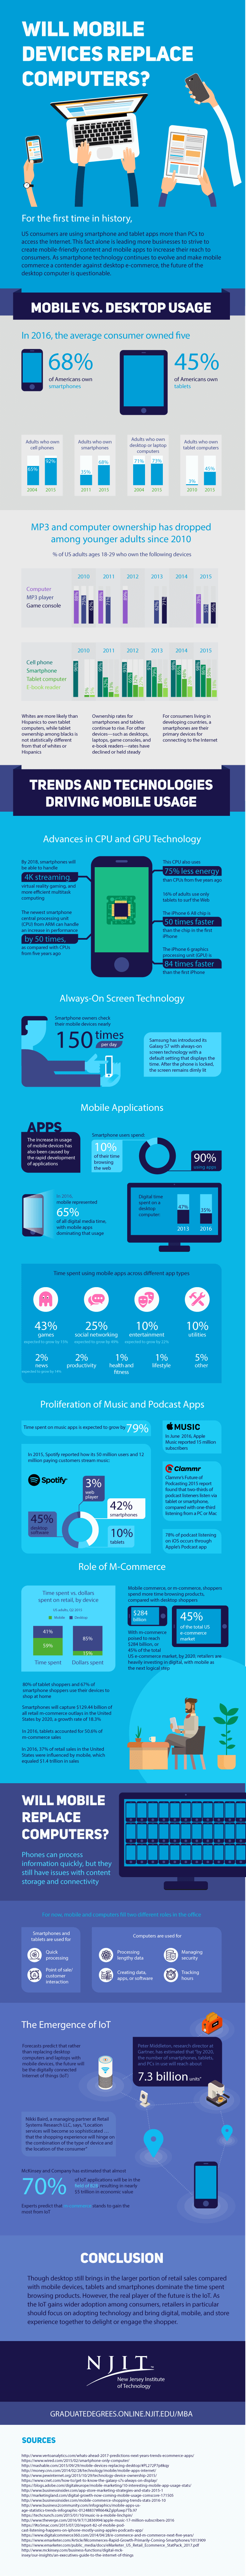 Will Mobile Devices Replace Computers - #infographic